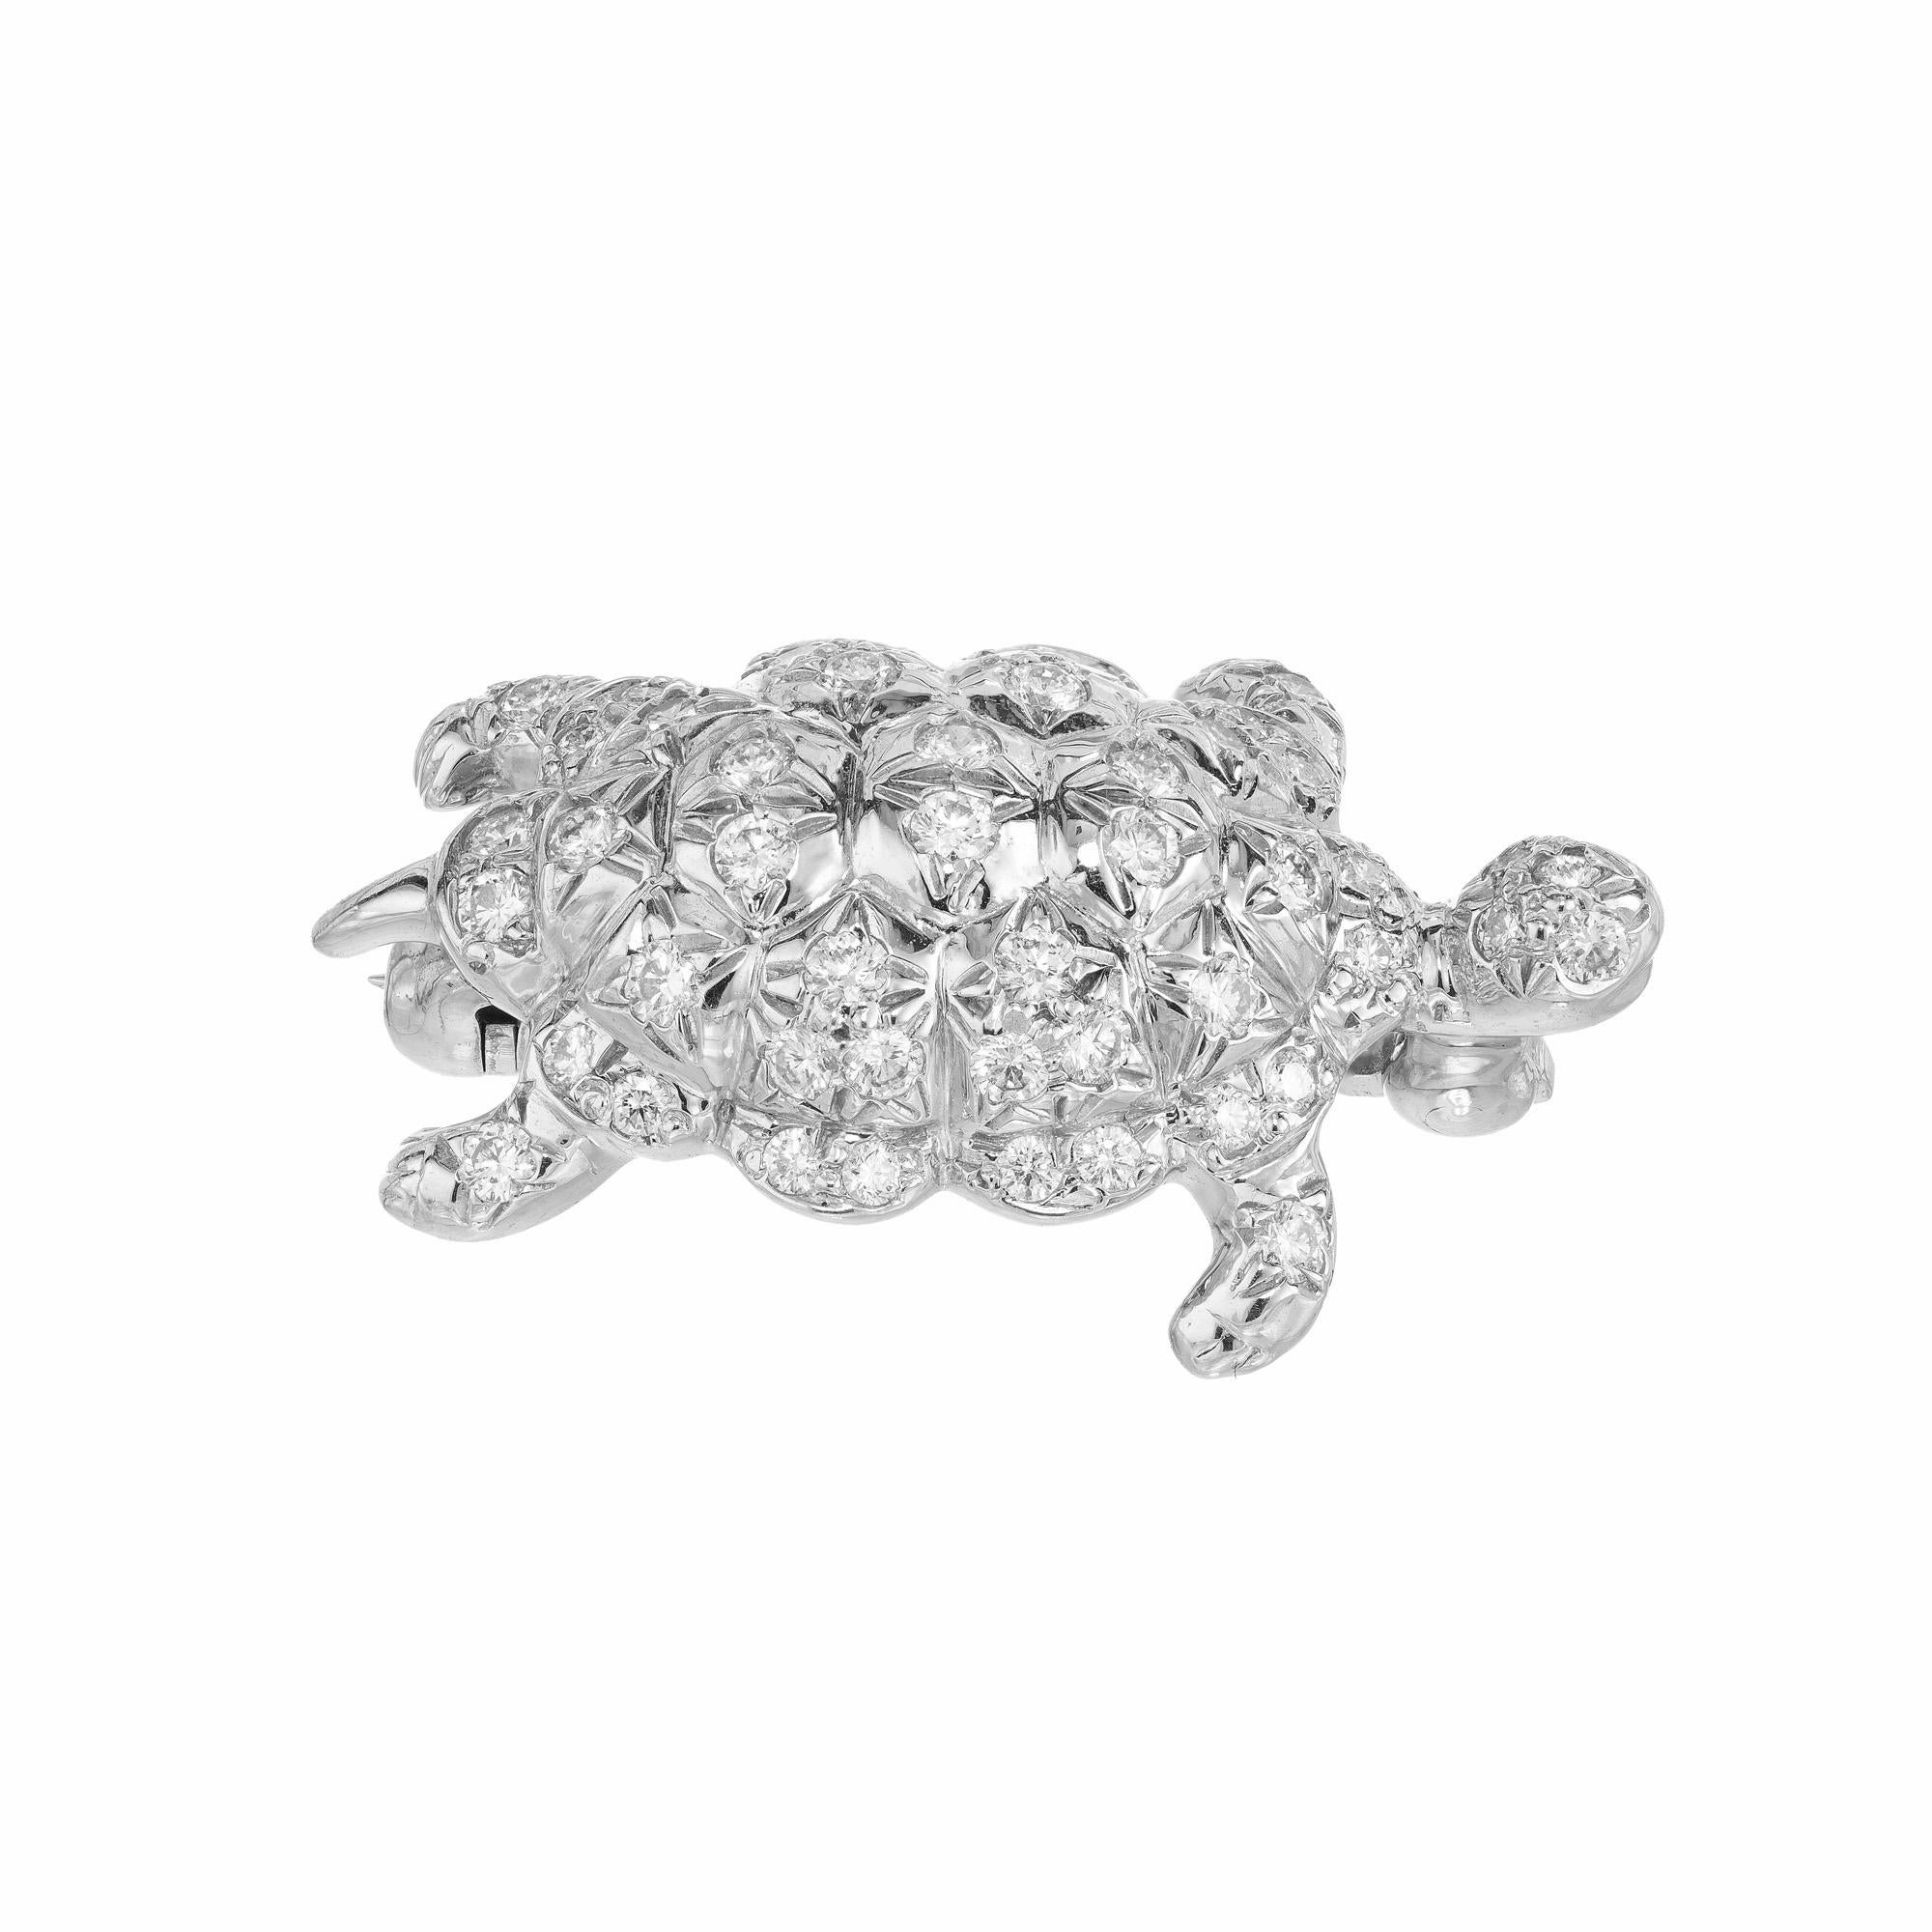 An exquisite .50 carat Tiffany & Co platinum diamond turtle brooch that can be used as a pendant as well. It’s an extremely well-crafted modern piece with 53 round brilliant diamonds throughout that are extremely high quality which Tiffany is known